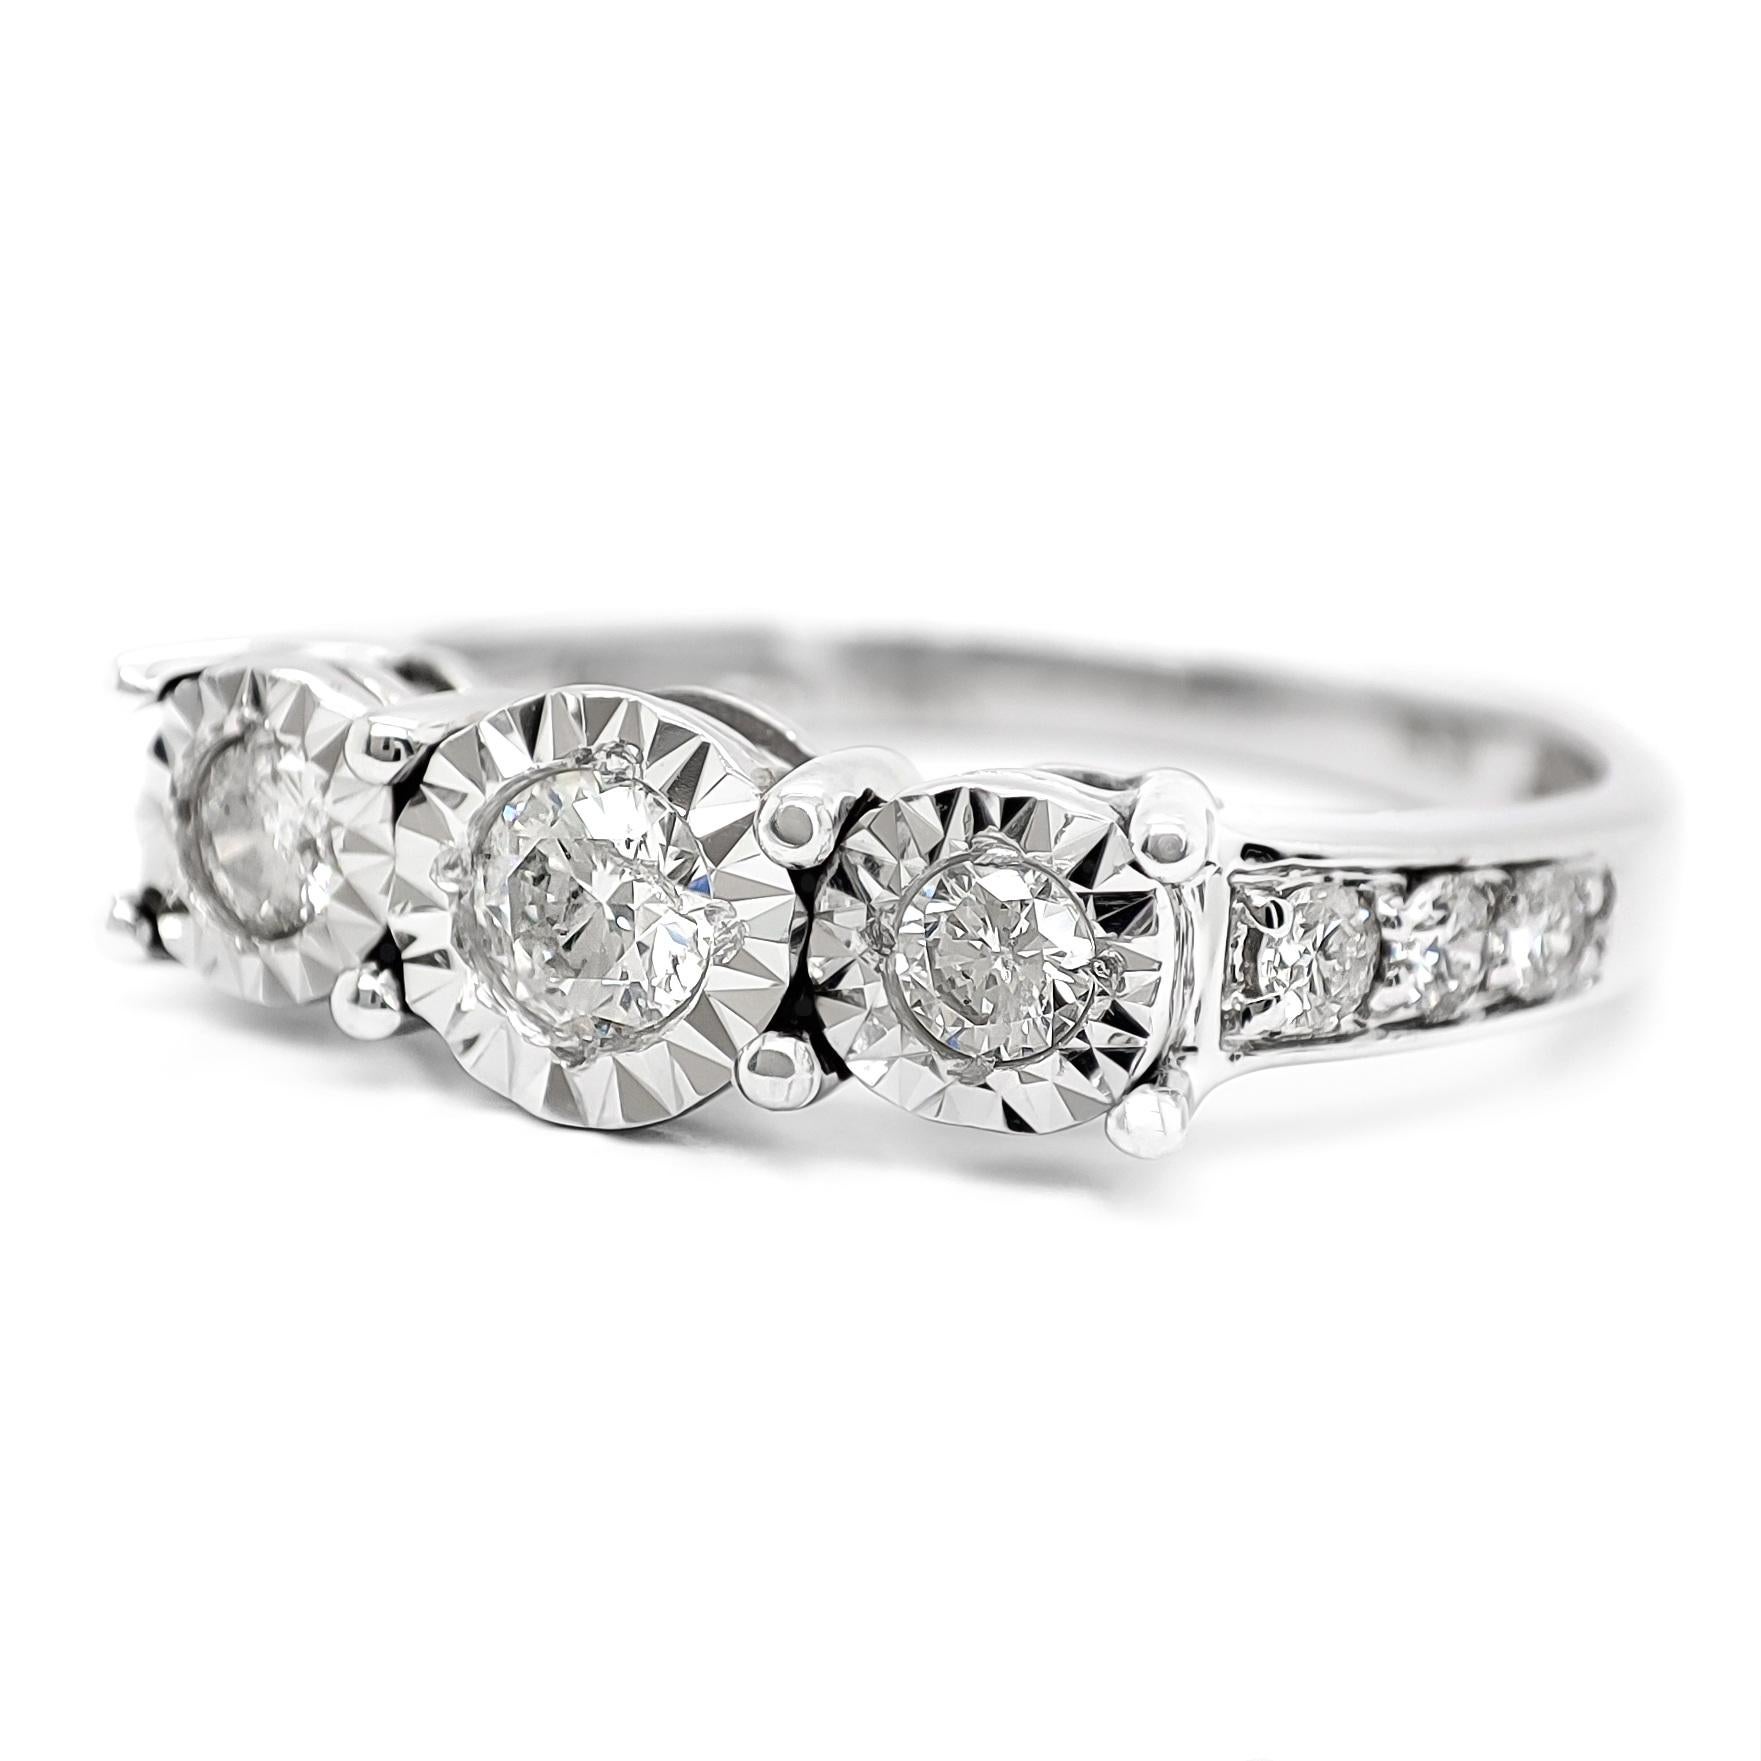 FOR THE USA CUSTOMERS NO VAT

Imagine a mesmerizing 0.47 carat round brilliant diamond ring, cradled in the elegance of 14K white gold. This exquisite piece boasts a constellation of 9 diamonds, collectively weighing 0.47 carats. These diamonds,